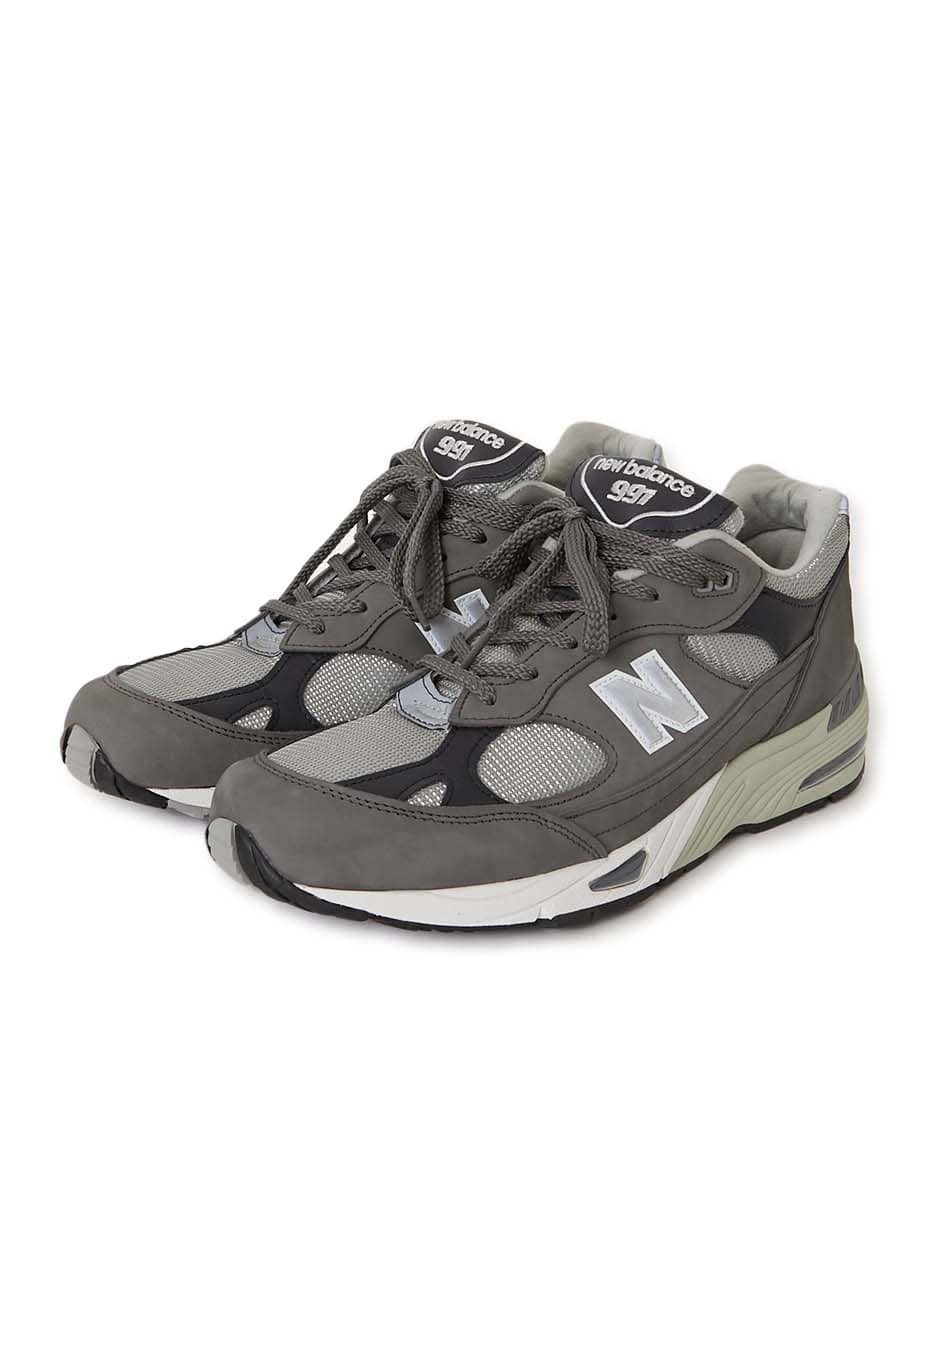 NEW BALANCE M991 GNS MADE IN UK シューズ